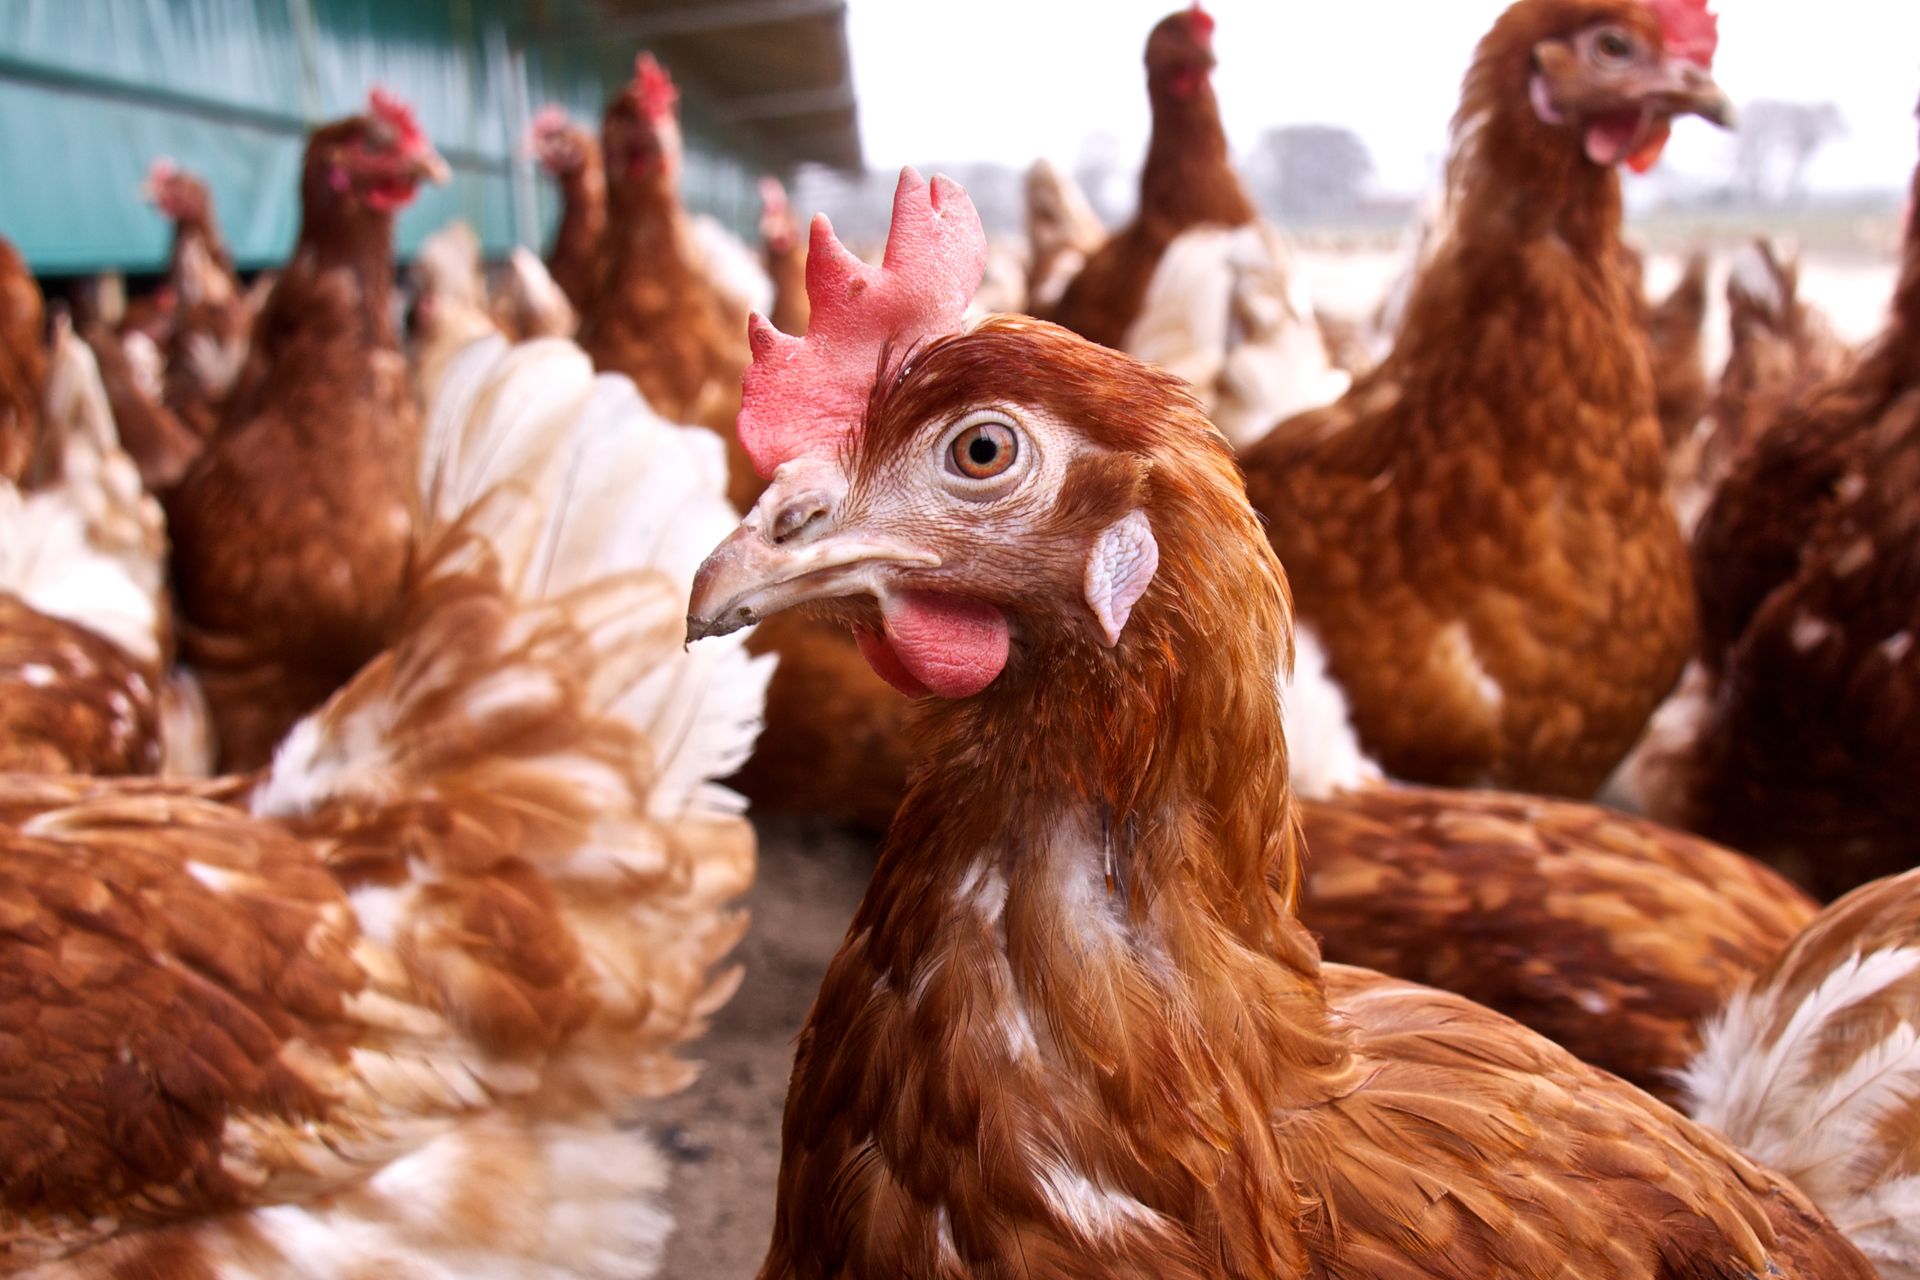 Solutions for poultry